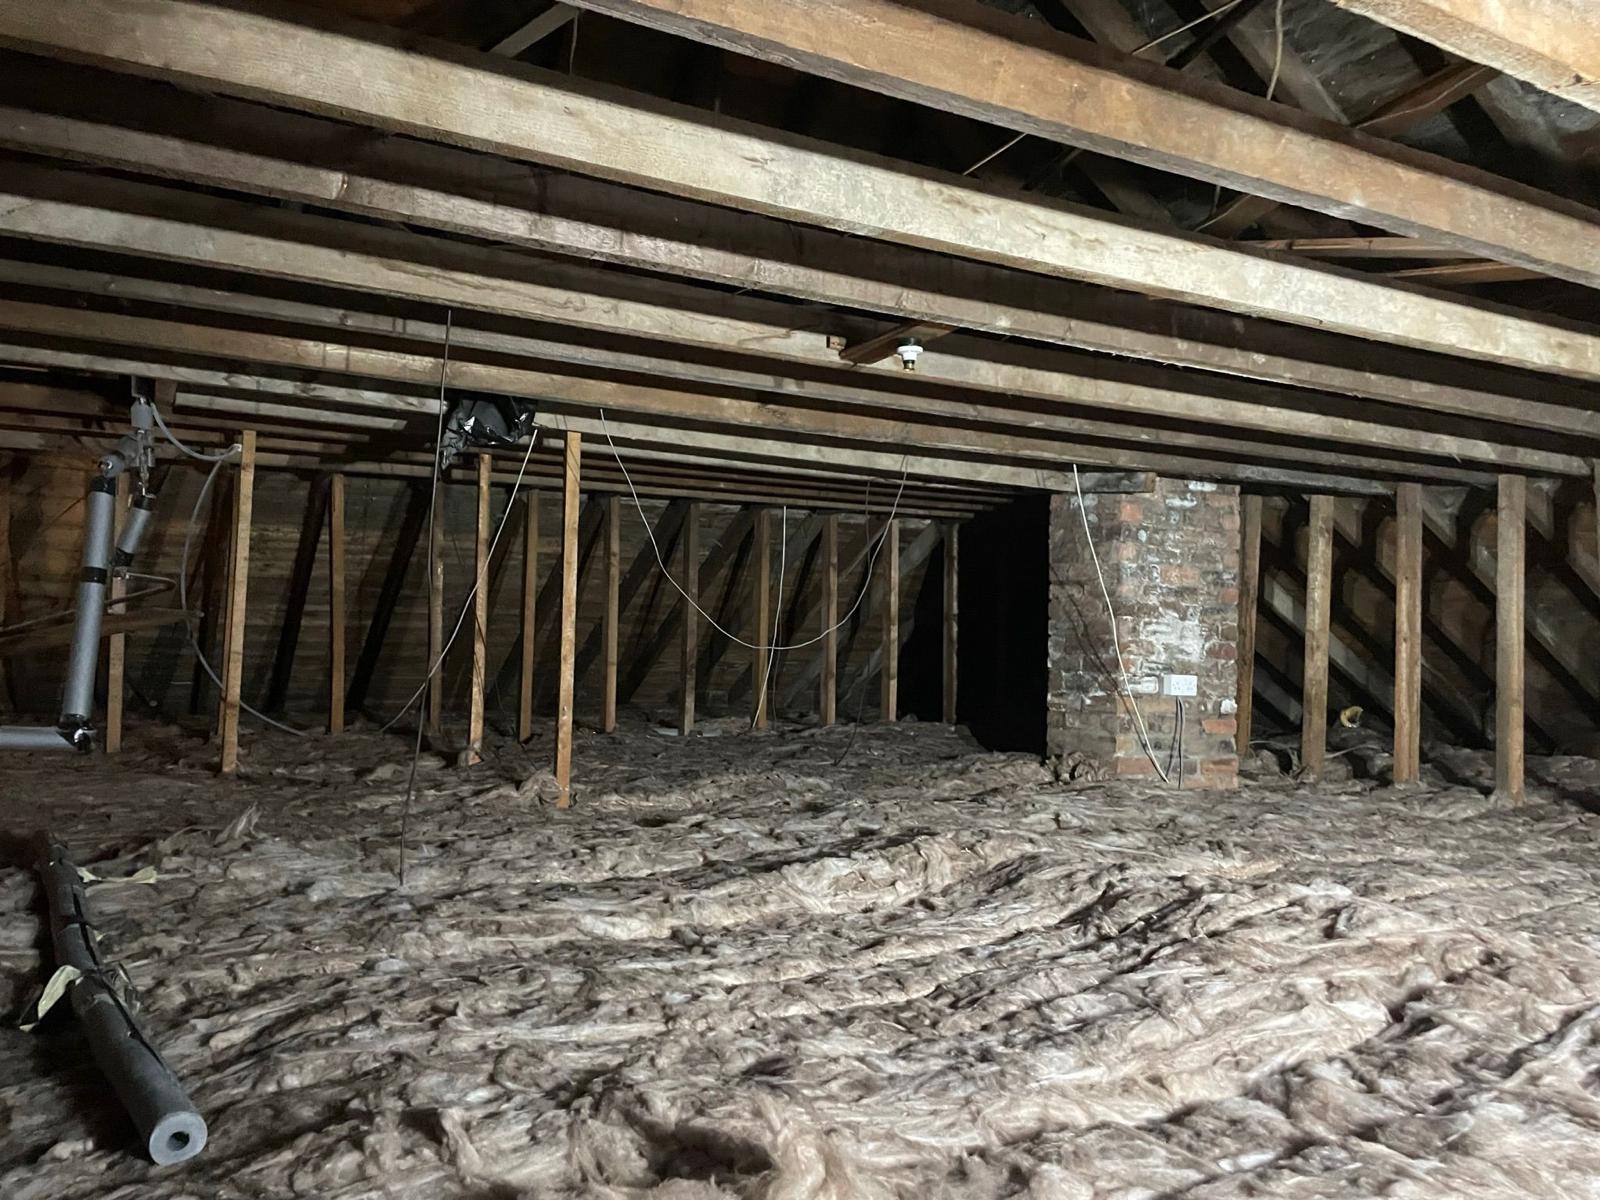 New Loft Insulation installed after damaged insulation was removed